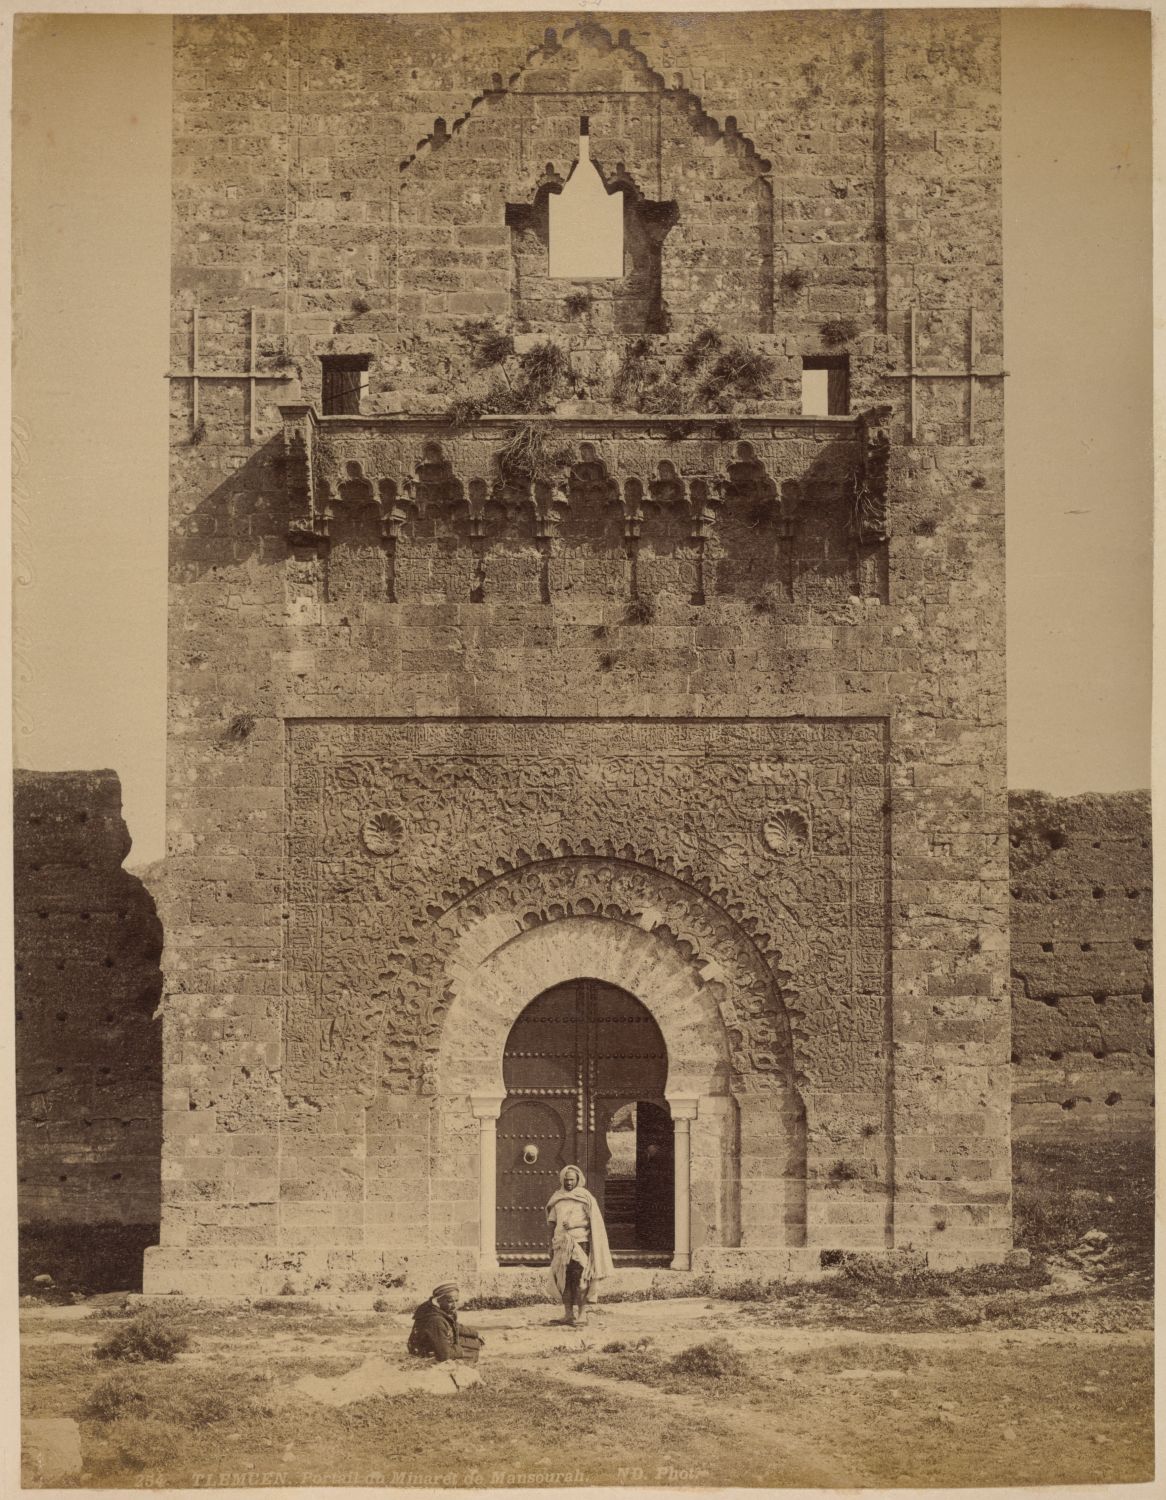 View of the minaret's base, men in front